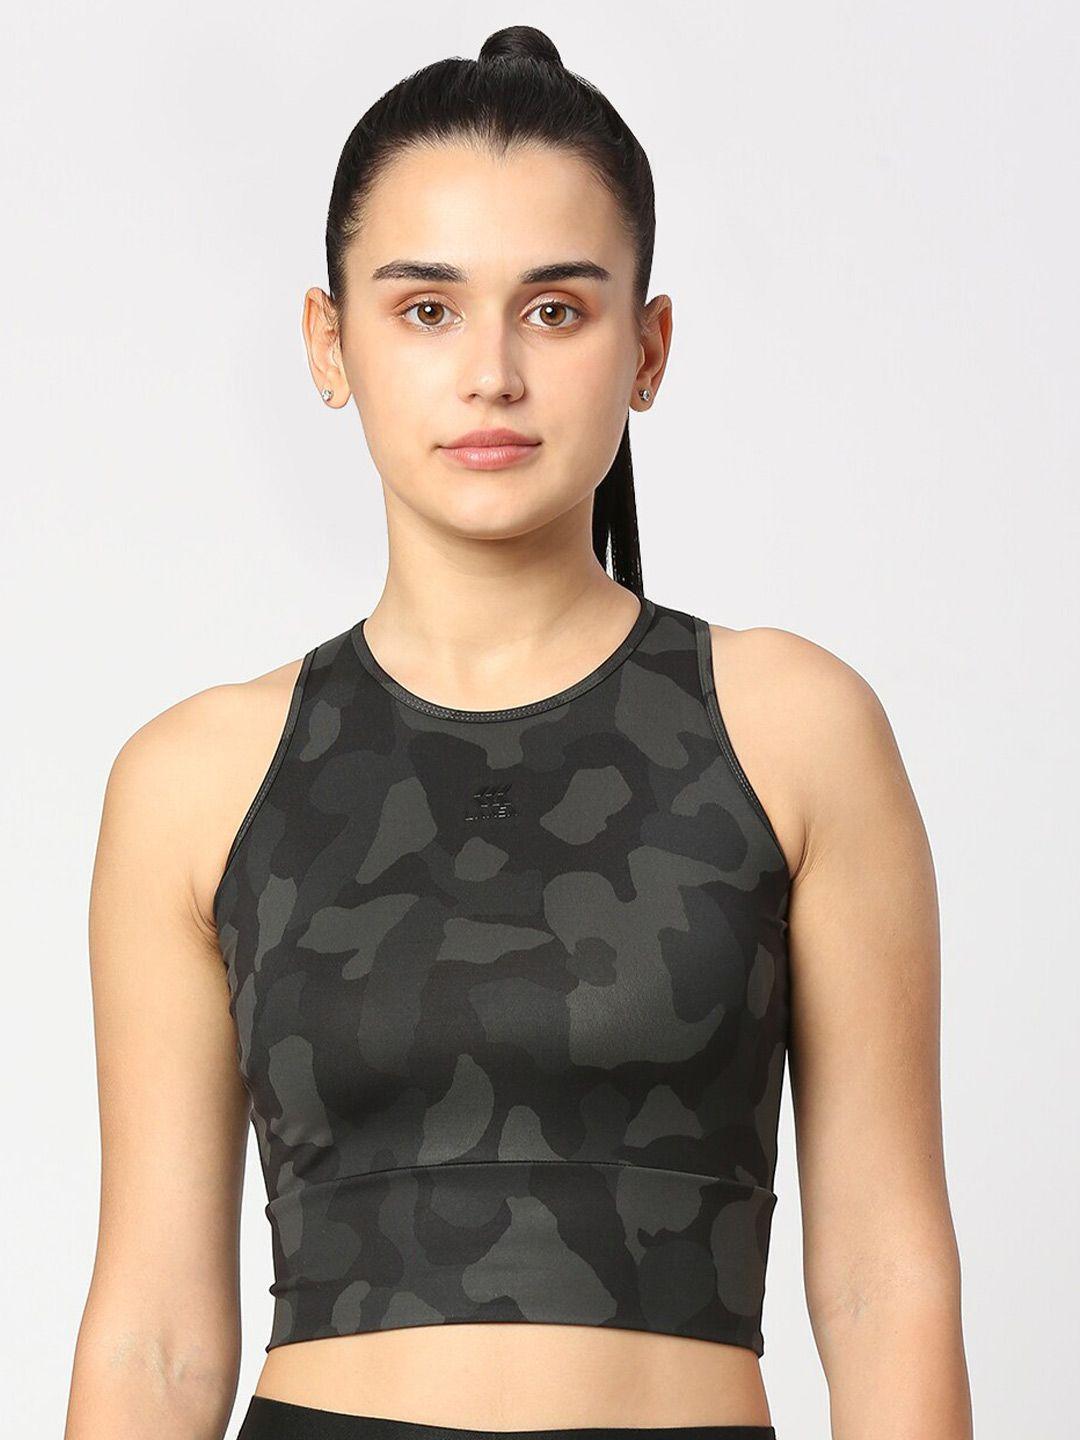 laasa sports abstract printed fitted crop top